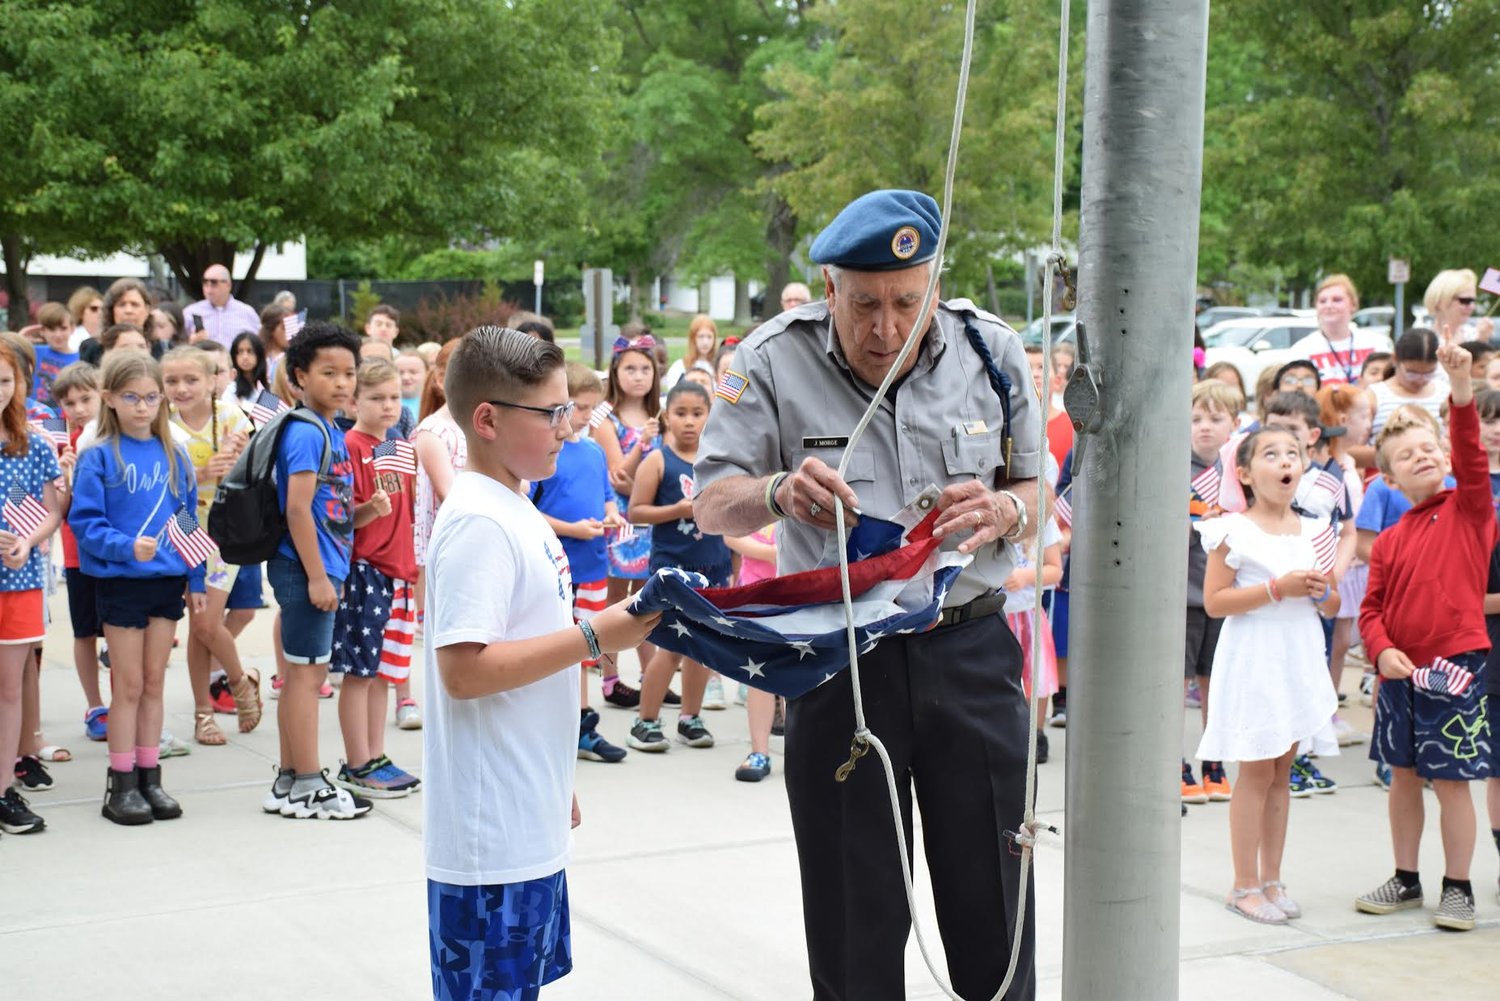 Jim Morge from American Veterans Post 111 in Patchogue and student Brody raise the flag during the Flag Day ceremony at Sylvan Avenue Elementary School.